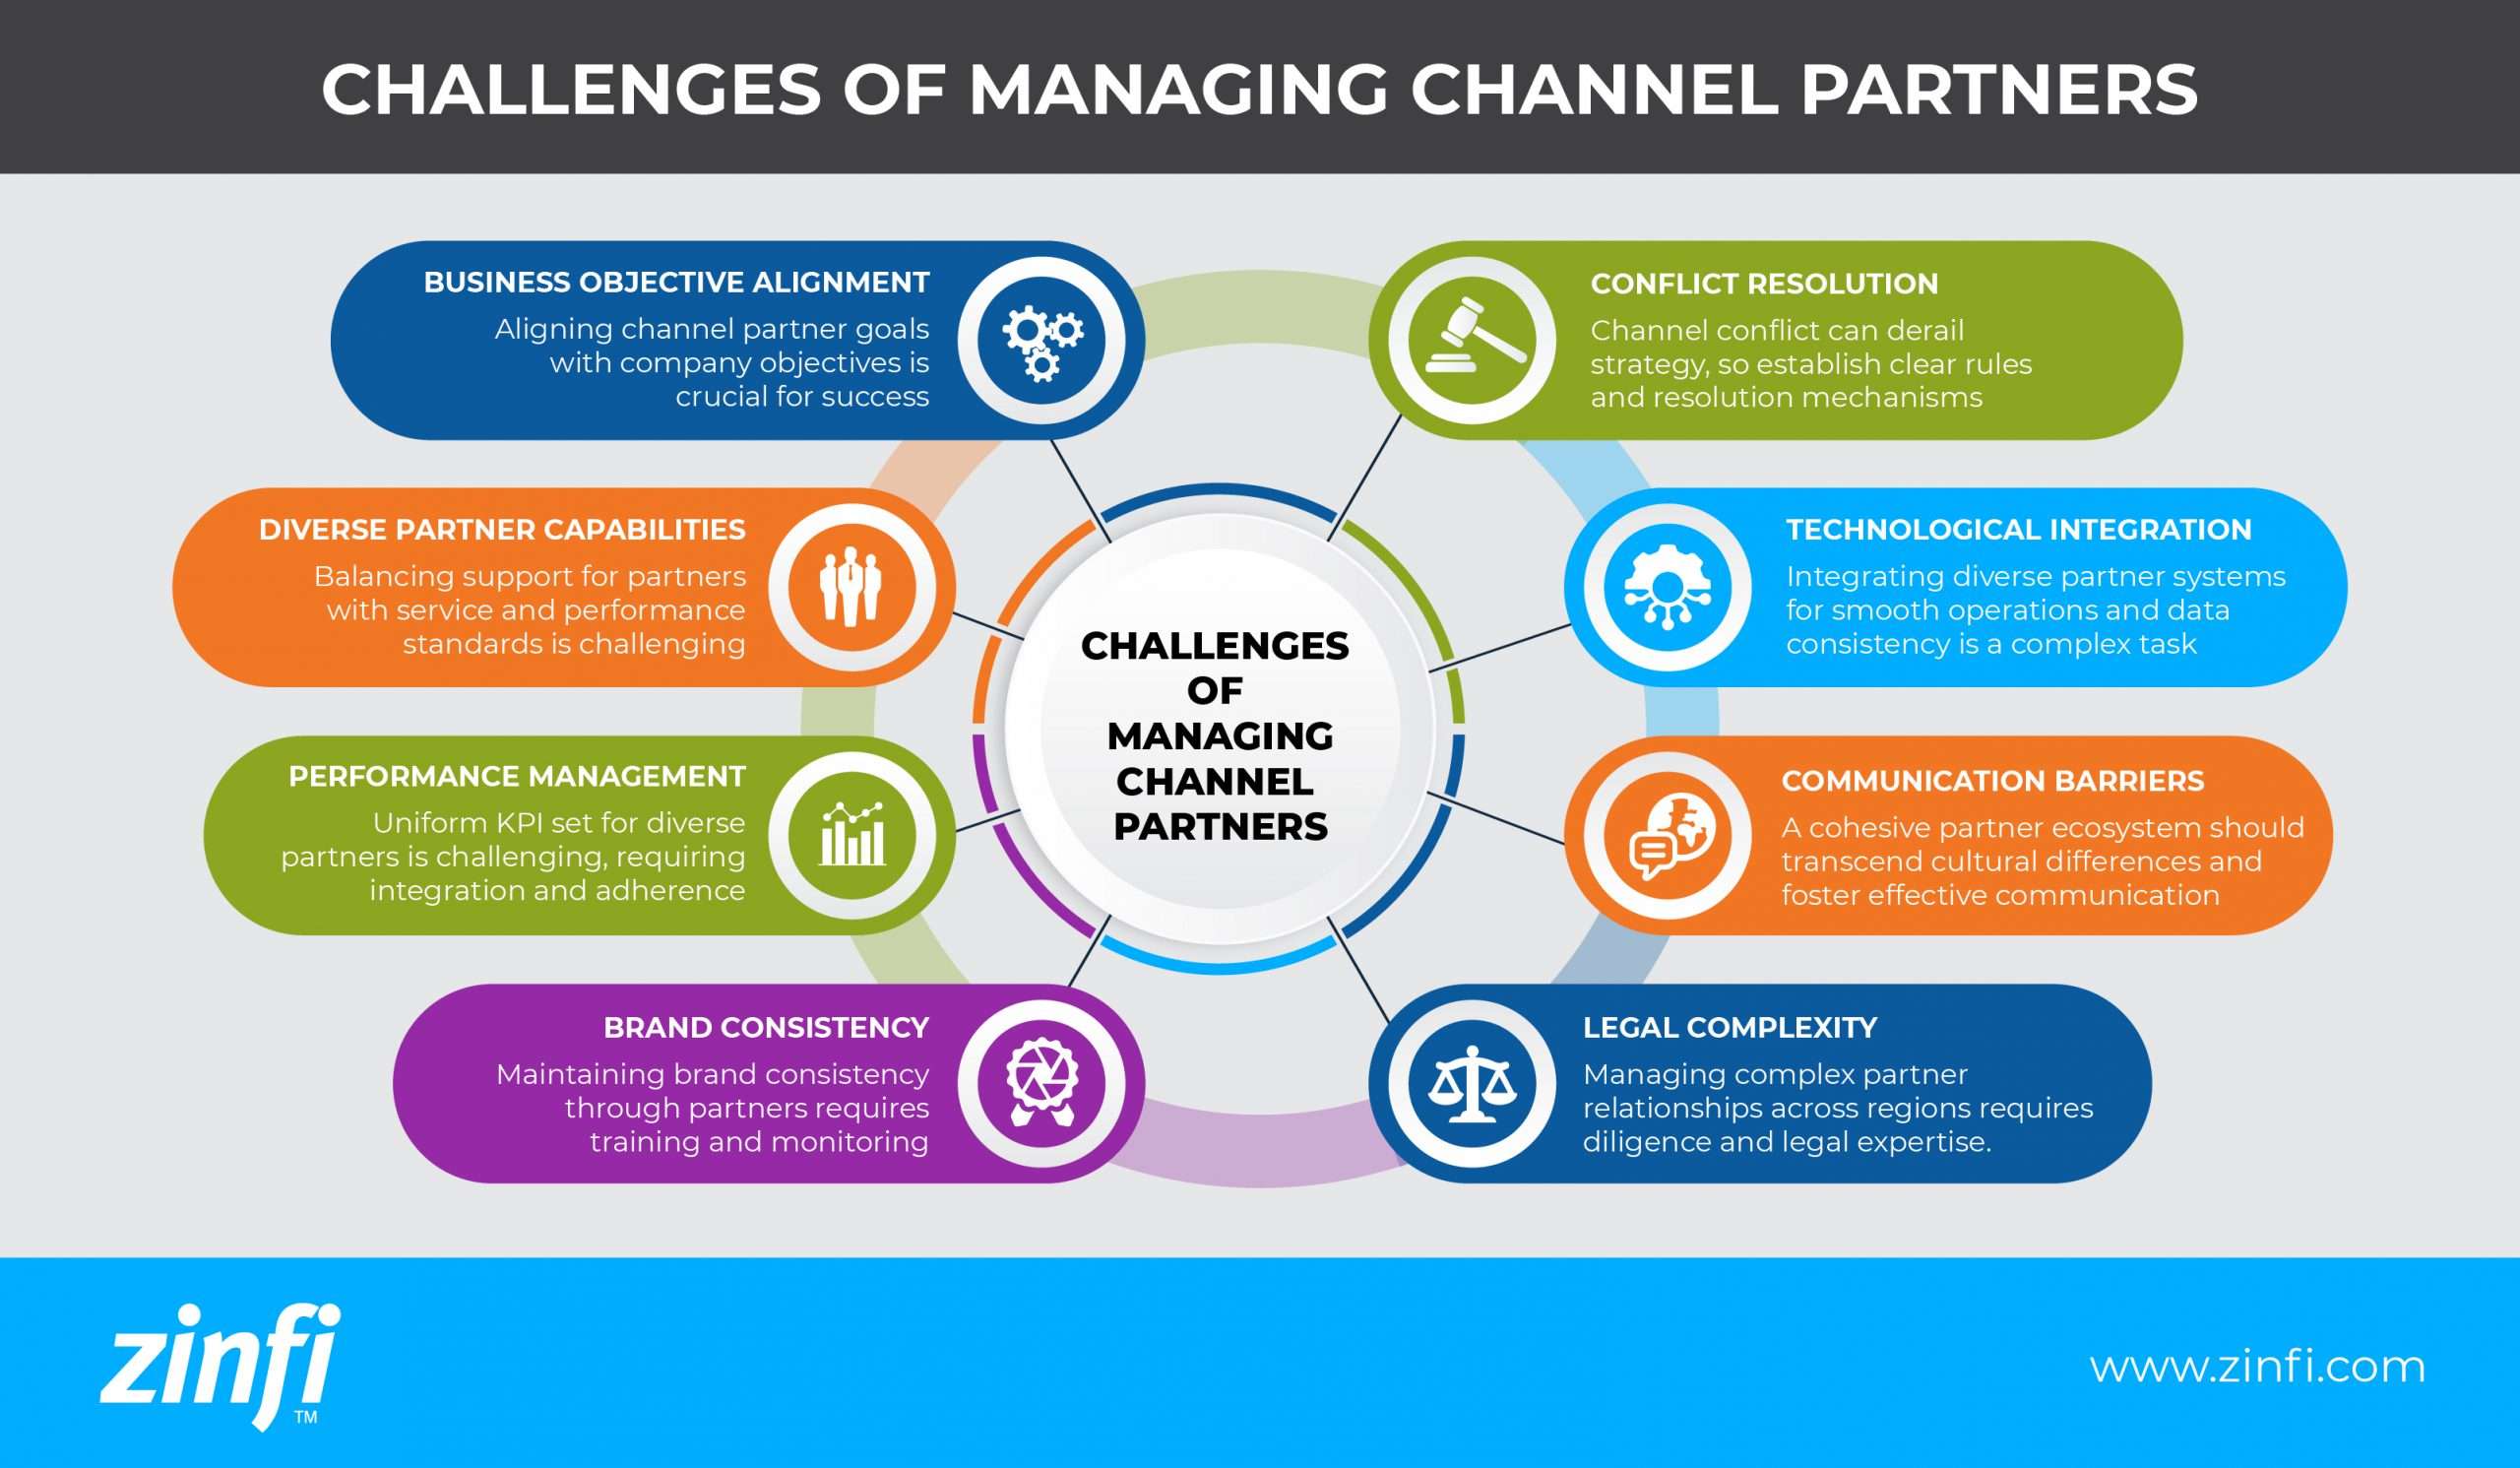 What are the challenges of managing channel partners